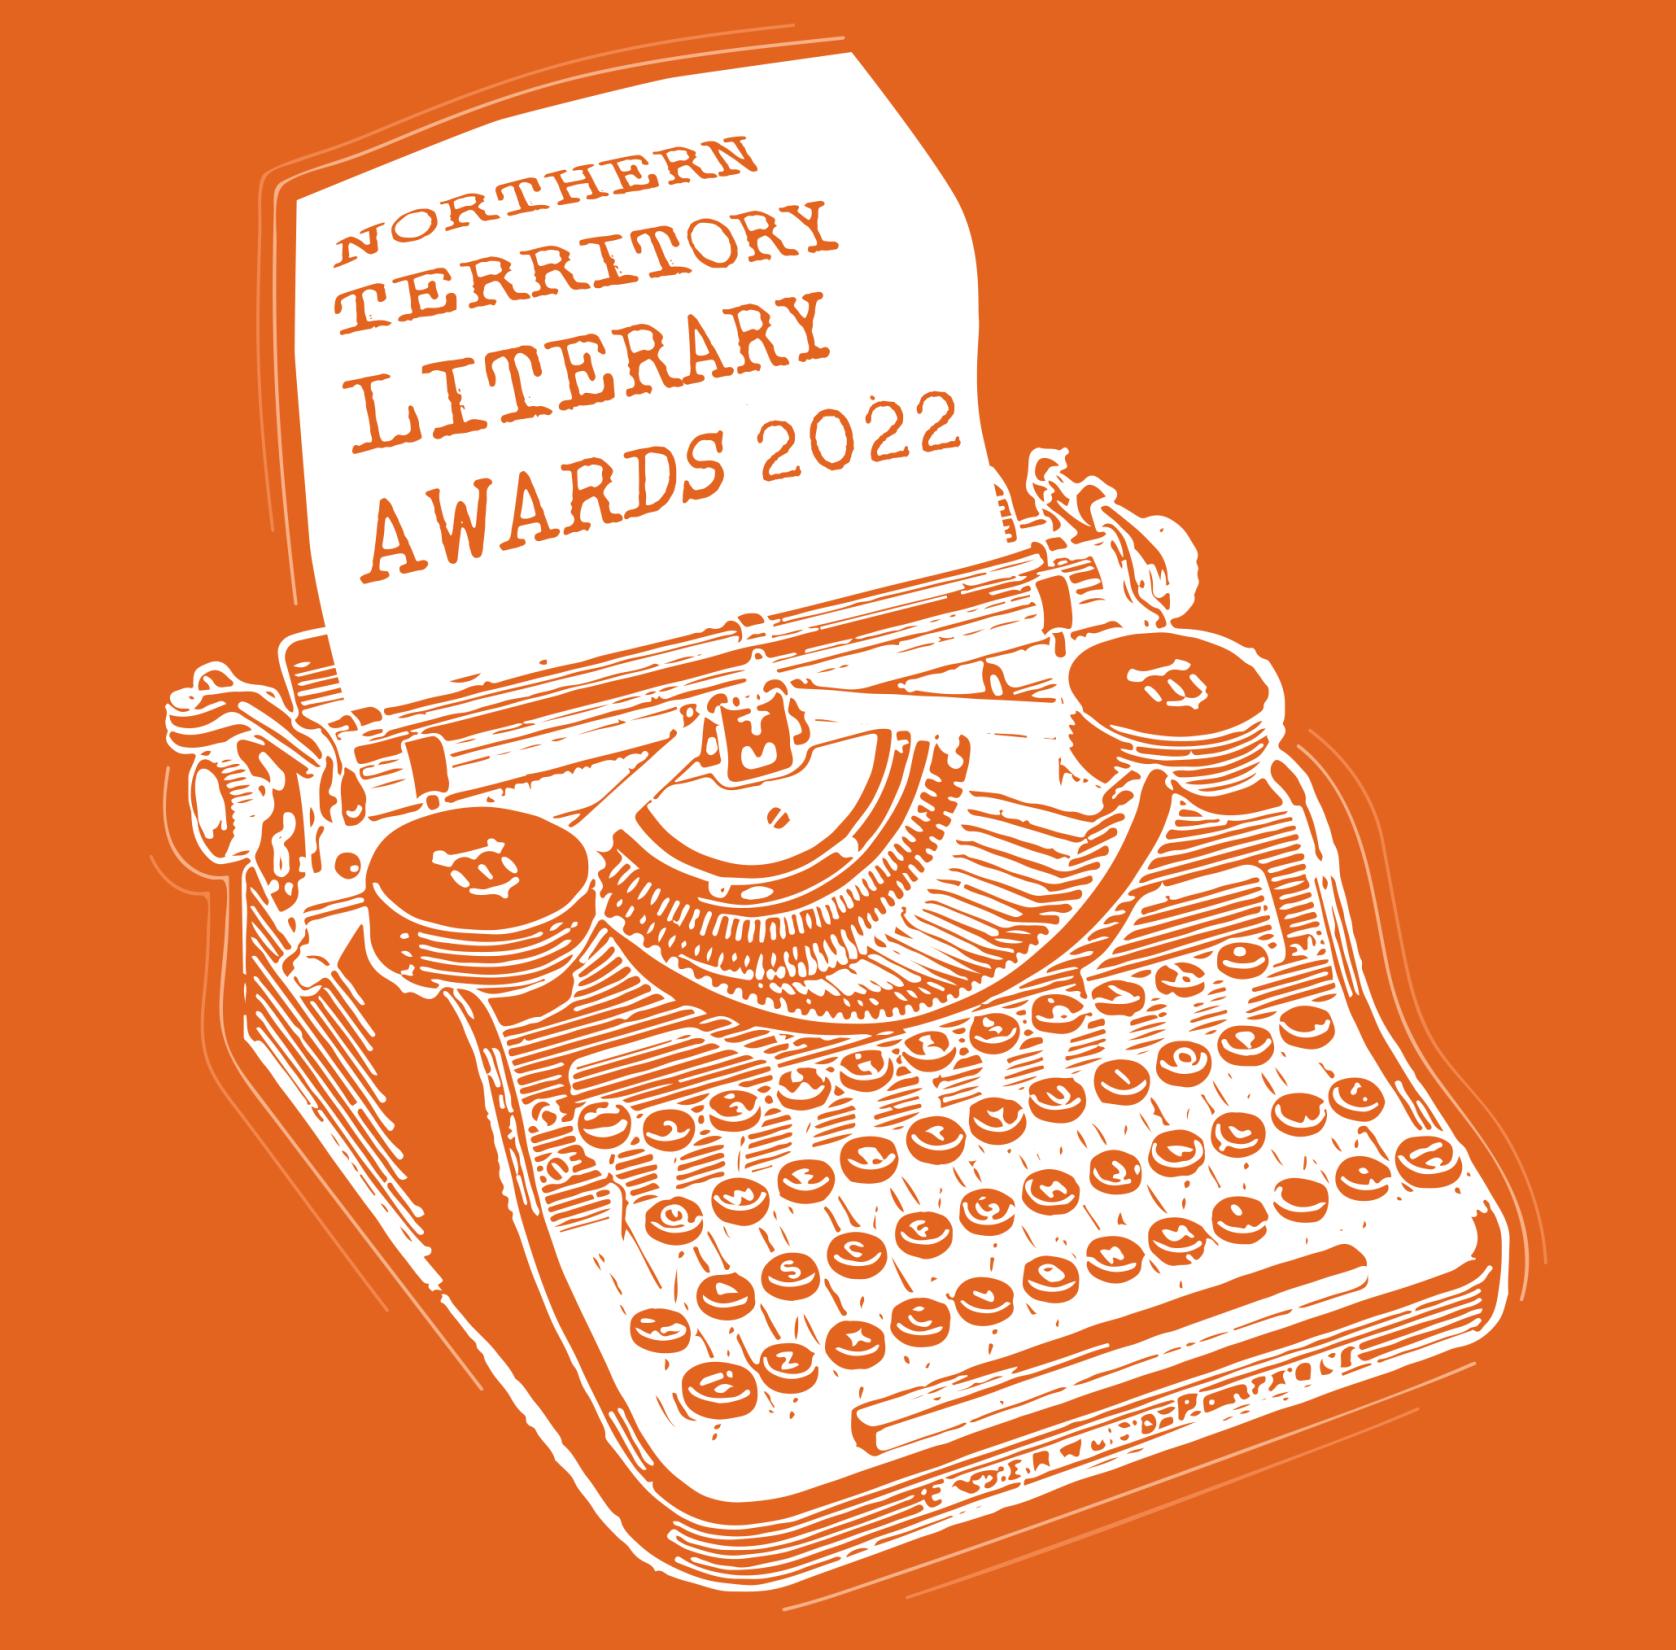 a typewriter with paper saying "Northern Territory Literary Awards 2022" Awards Ceremony